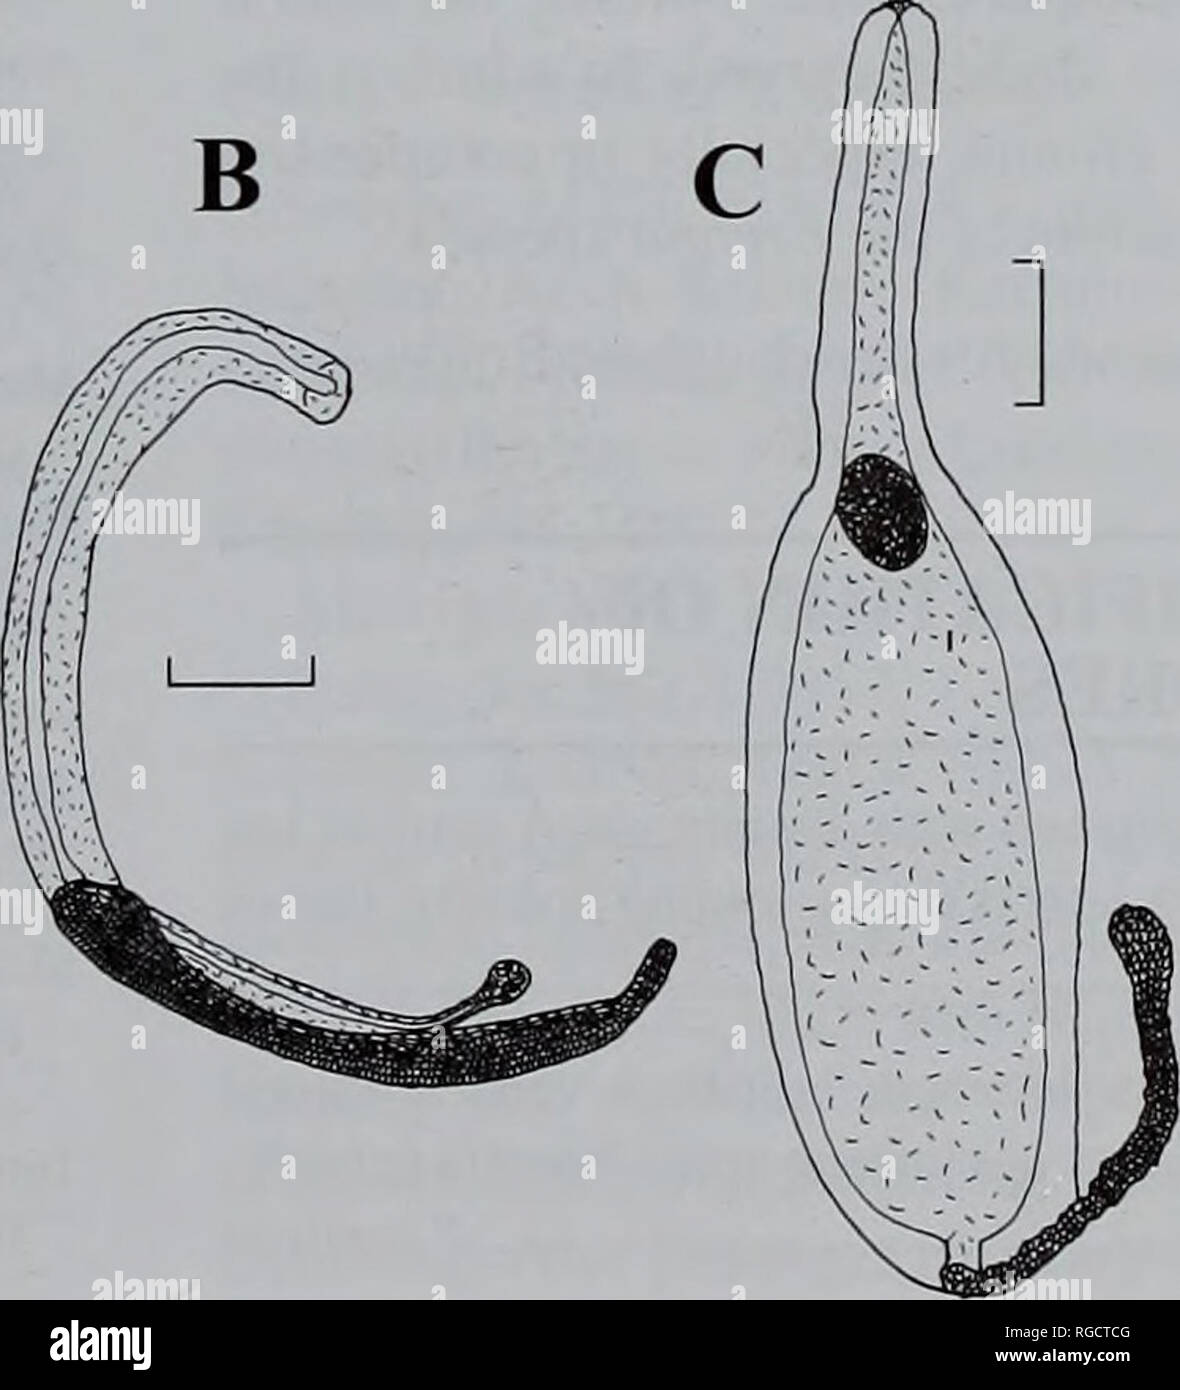 . Bulletin of the Natural History Museum (Zoology). Fig. 20 Parerenna emilyae. Bracts of A. the first and B. the second type. Scale 1 mm. and may disappear altogether; the nectosac then being T-shaped. There was a large muscle-free zone on the apical, adaxial part of its lower side. The pallial canal was quite long, extending from the base of the thrust block to beyond the point of origin of the pedicular canal. The long pedicular canal was inserted onto the nectosac either at the point of origin of the lateral radial canals, or slightly basal to it. On half of the fully developed nectophores  Stock Photo